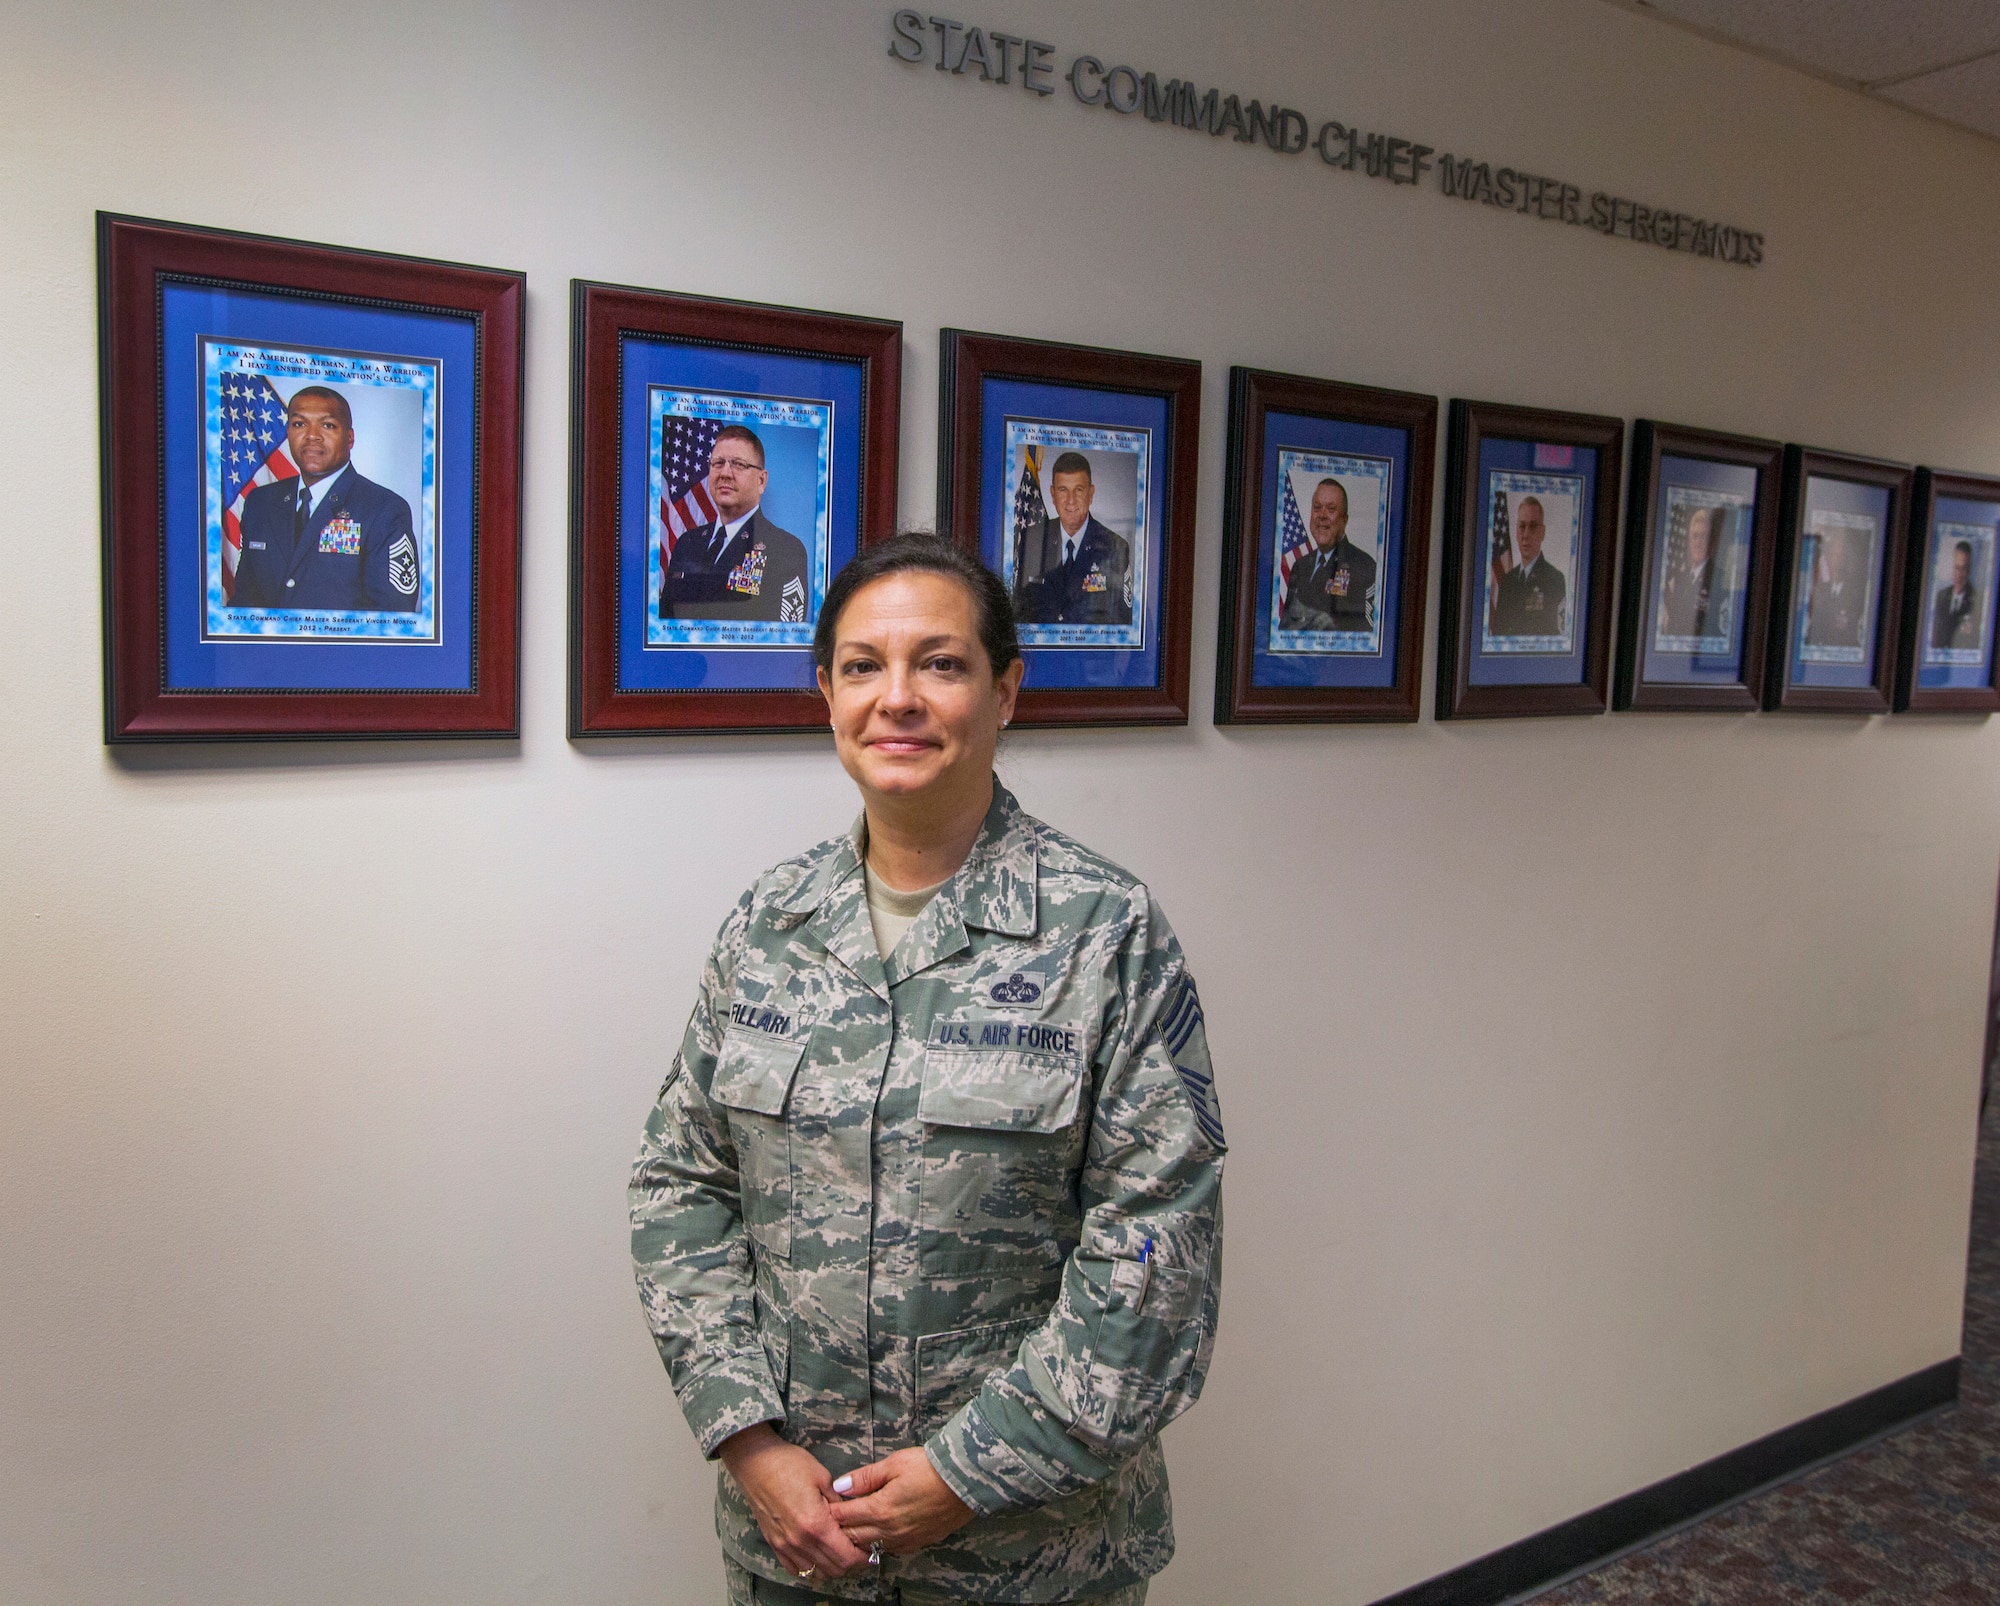 New Jersey State Command Chief Master Master Sgt. Janeen M. Fillari poses in front of the State Command Chief wall at Joint Force Headquarters, New Jersey Air National Guard, at Joint Base McGuire-Dix-Lakehurst, N.J., March 15, 2016. Fillari is the first woman to serve as the New Jersey State Command Chief Master Sergeant for the New Jersey Air National Guard. (U.S. Air National Guard photo by Master Sgt. Mark C. Olsen/Released)